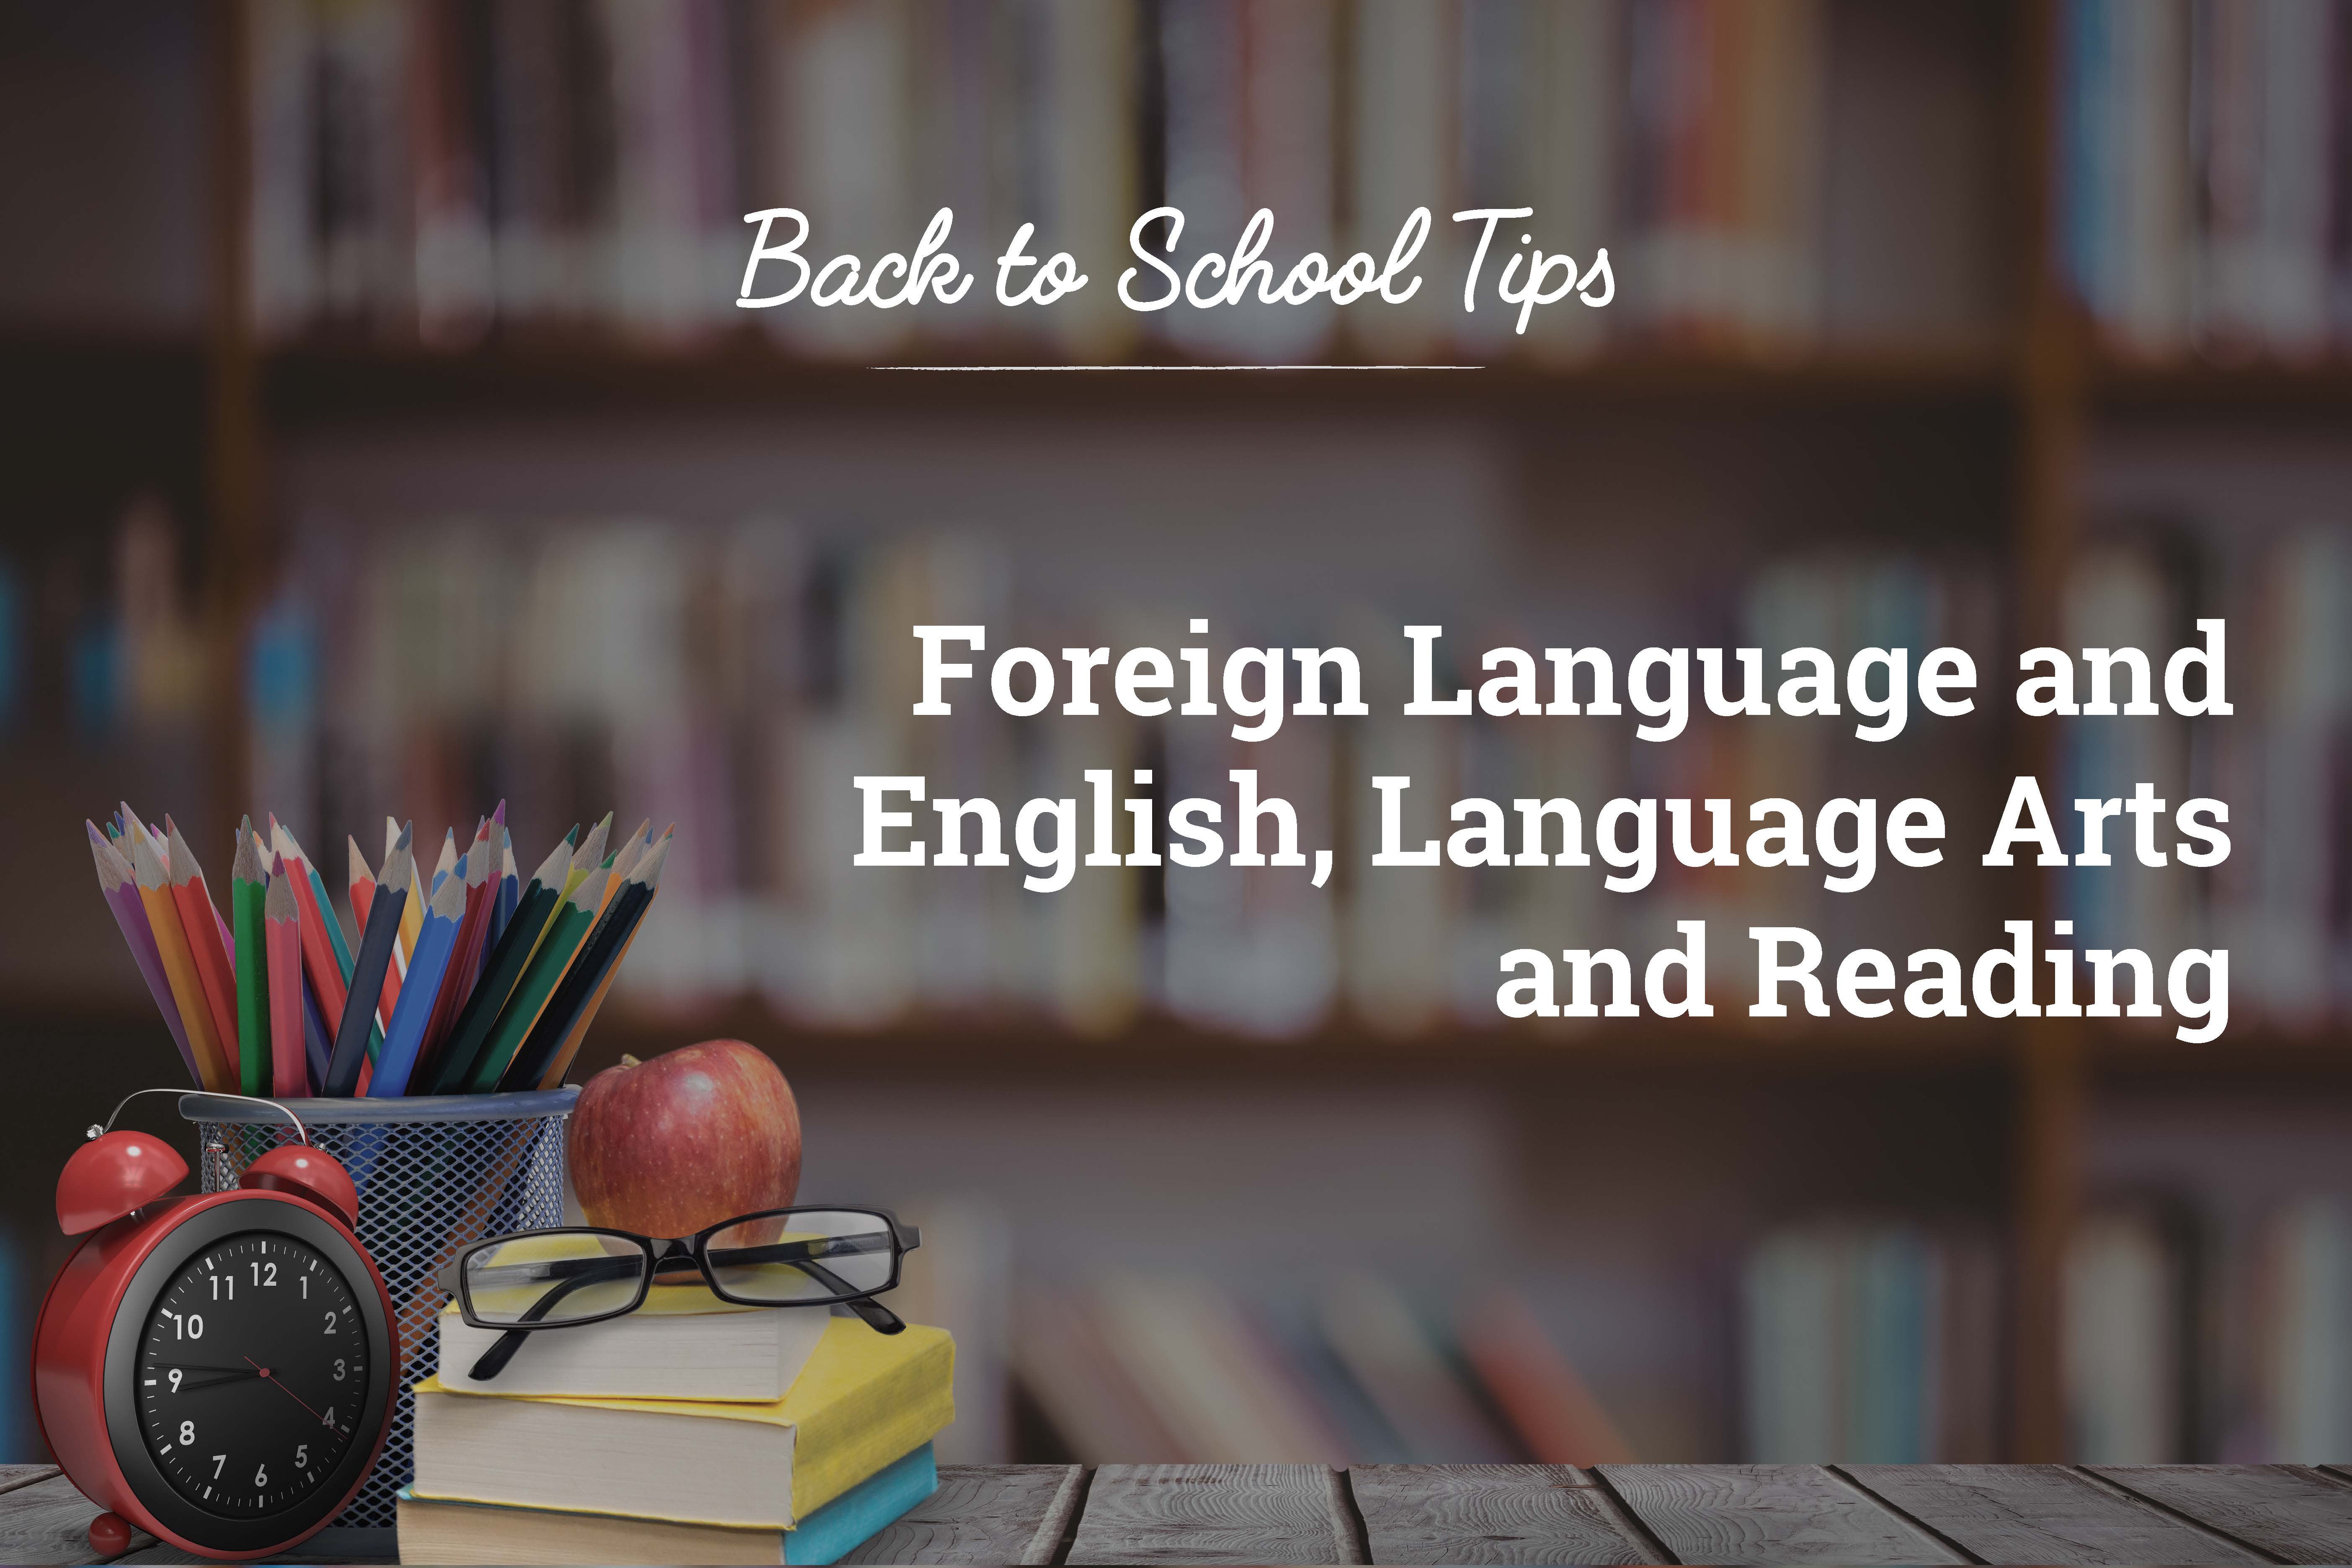 How to Make English, Language Arts, Reading and Foreign Languages a Breeze